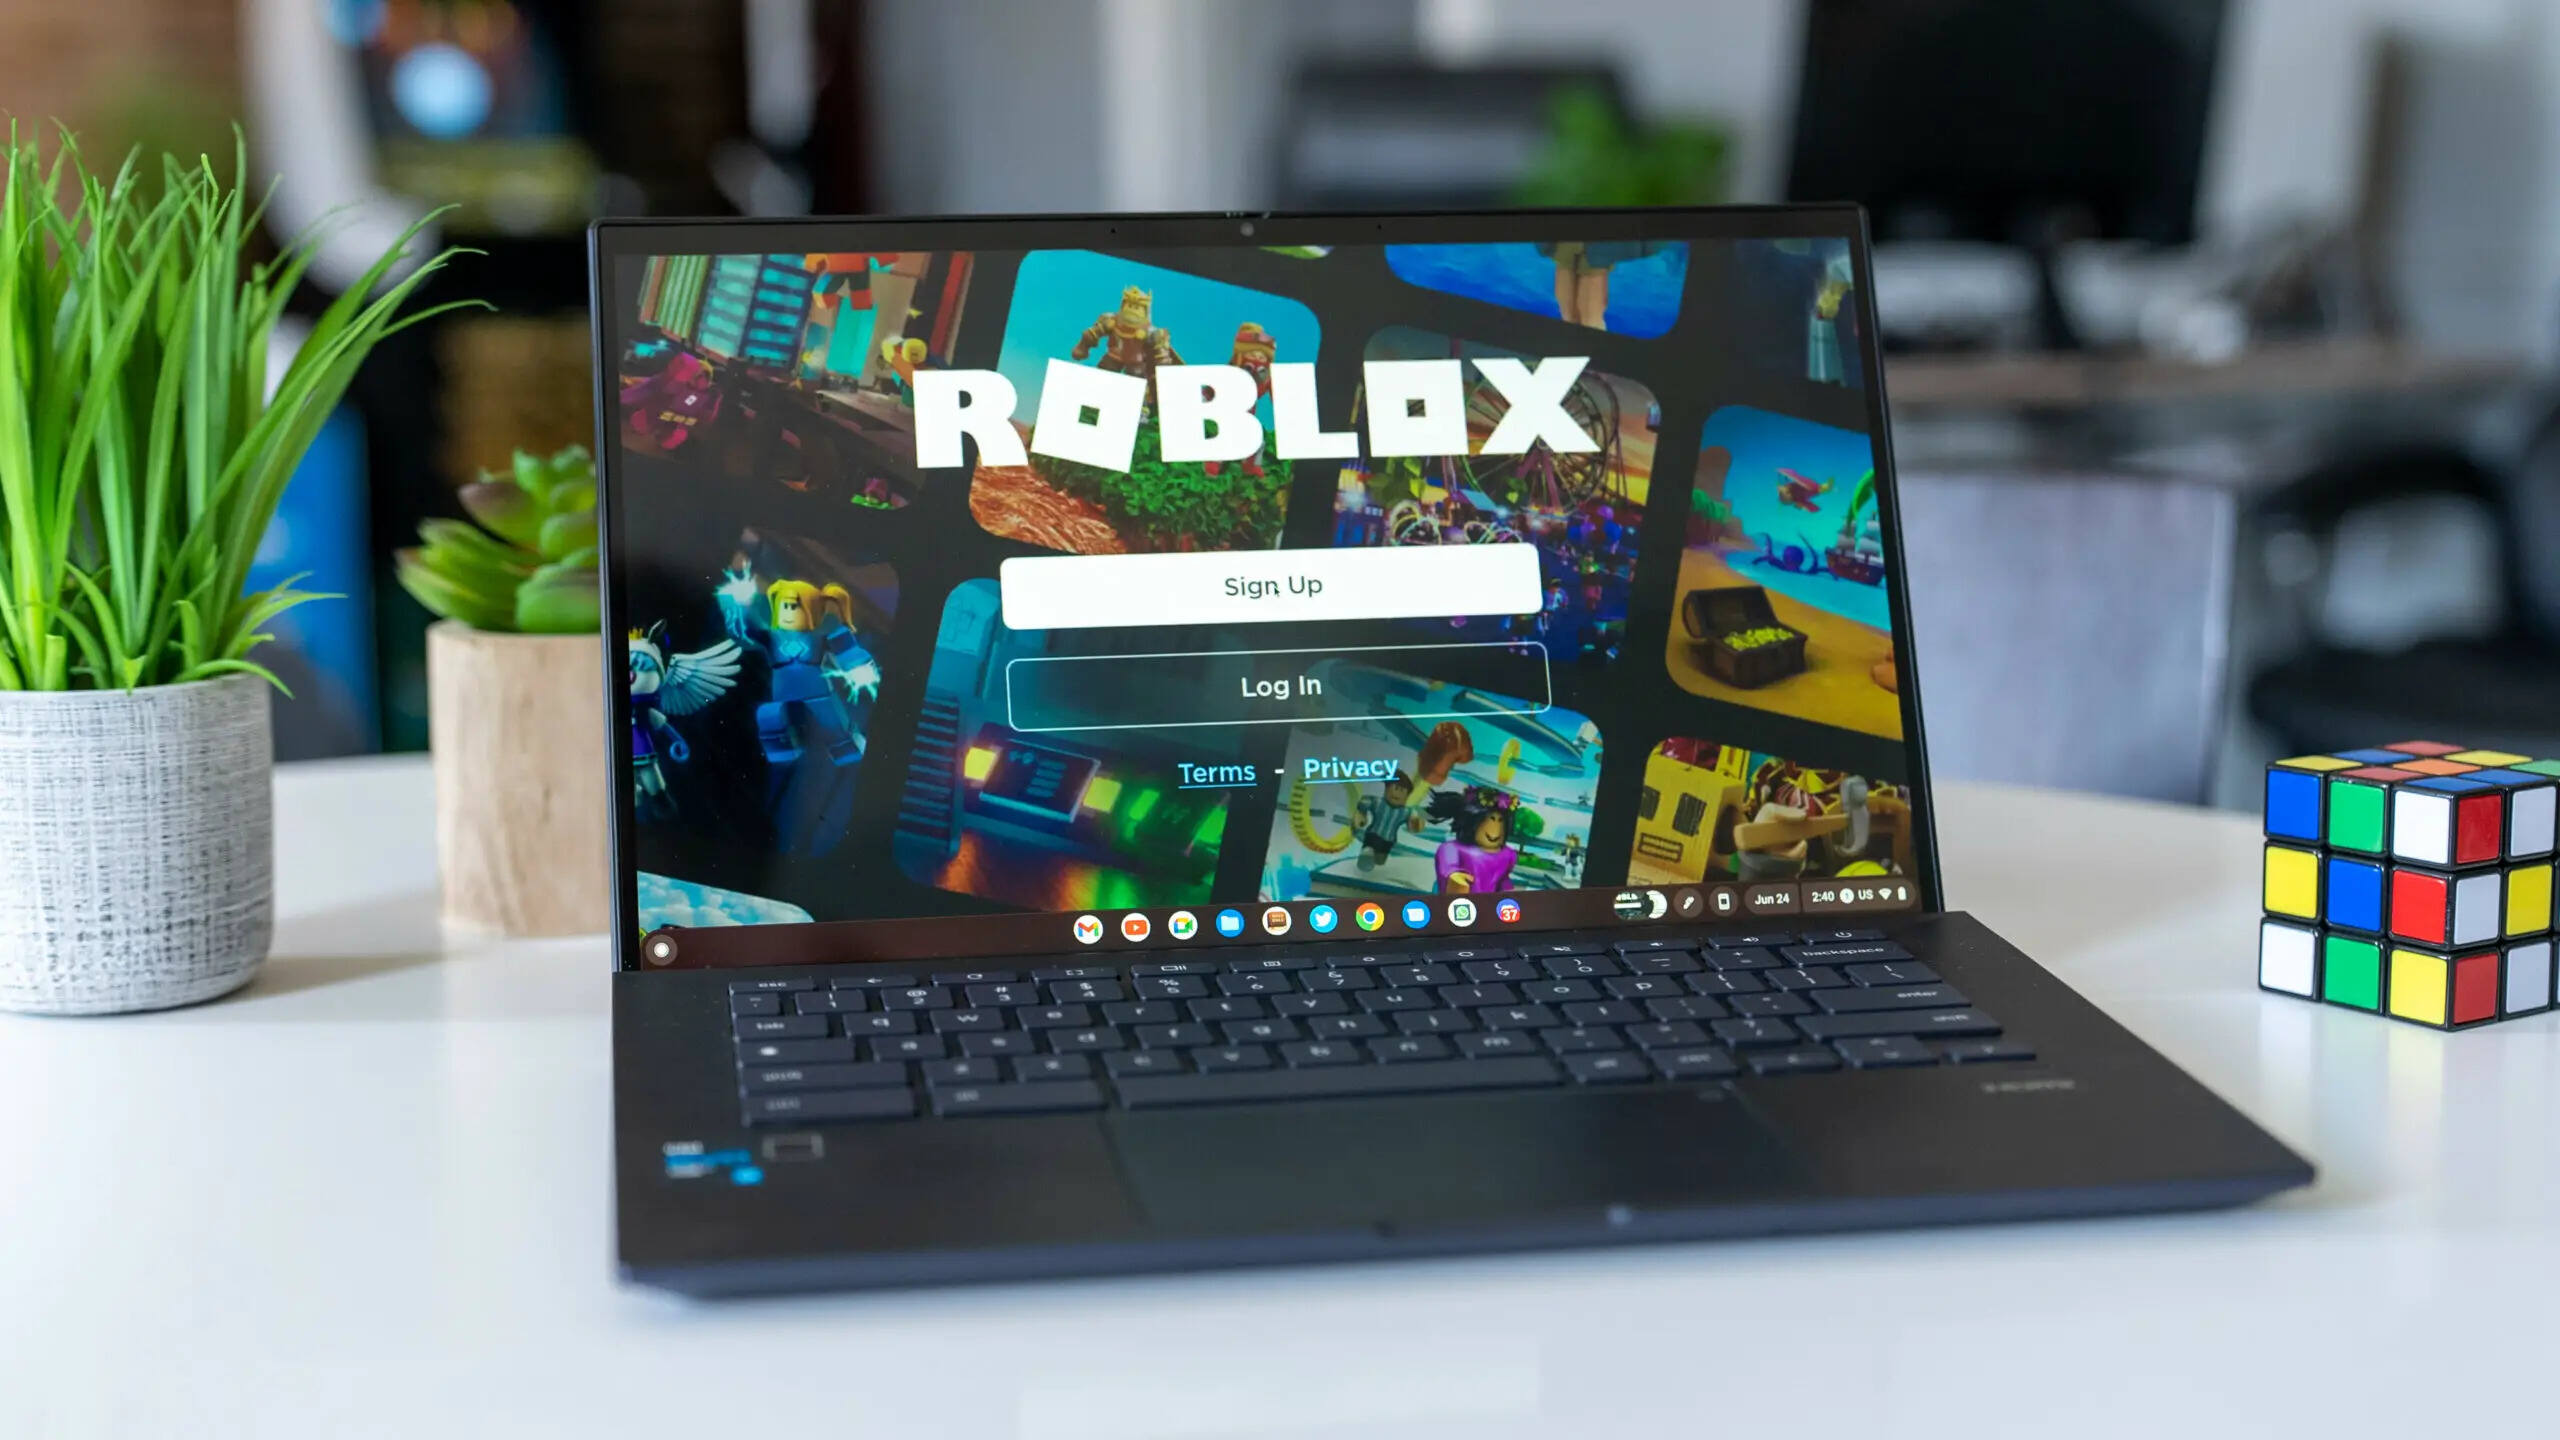 How To Download Roblox On Chromebook?